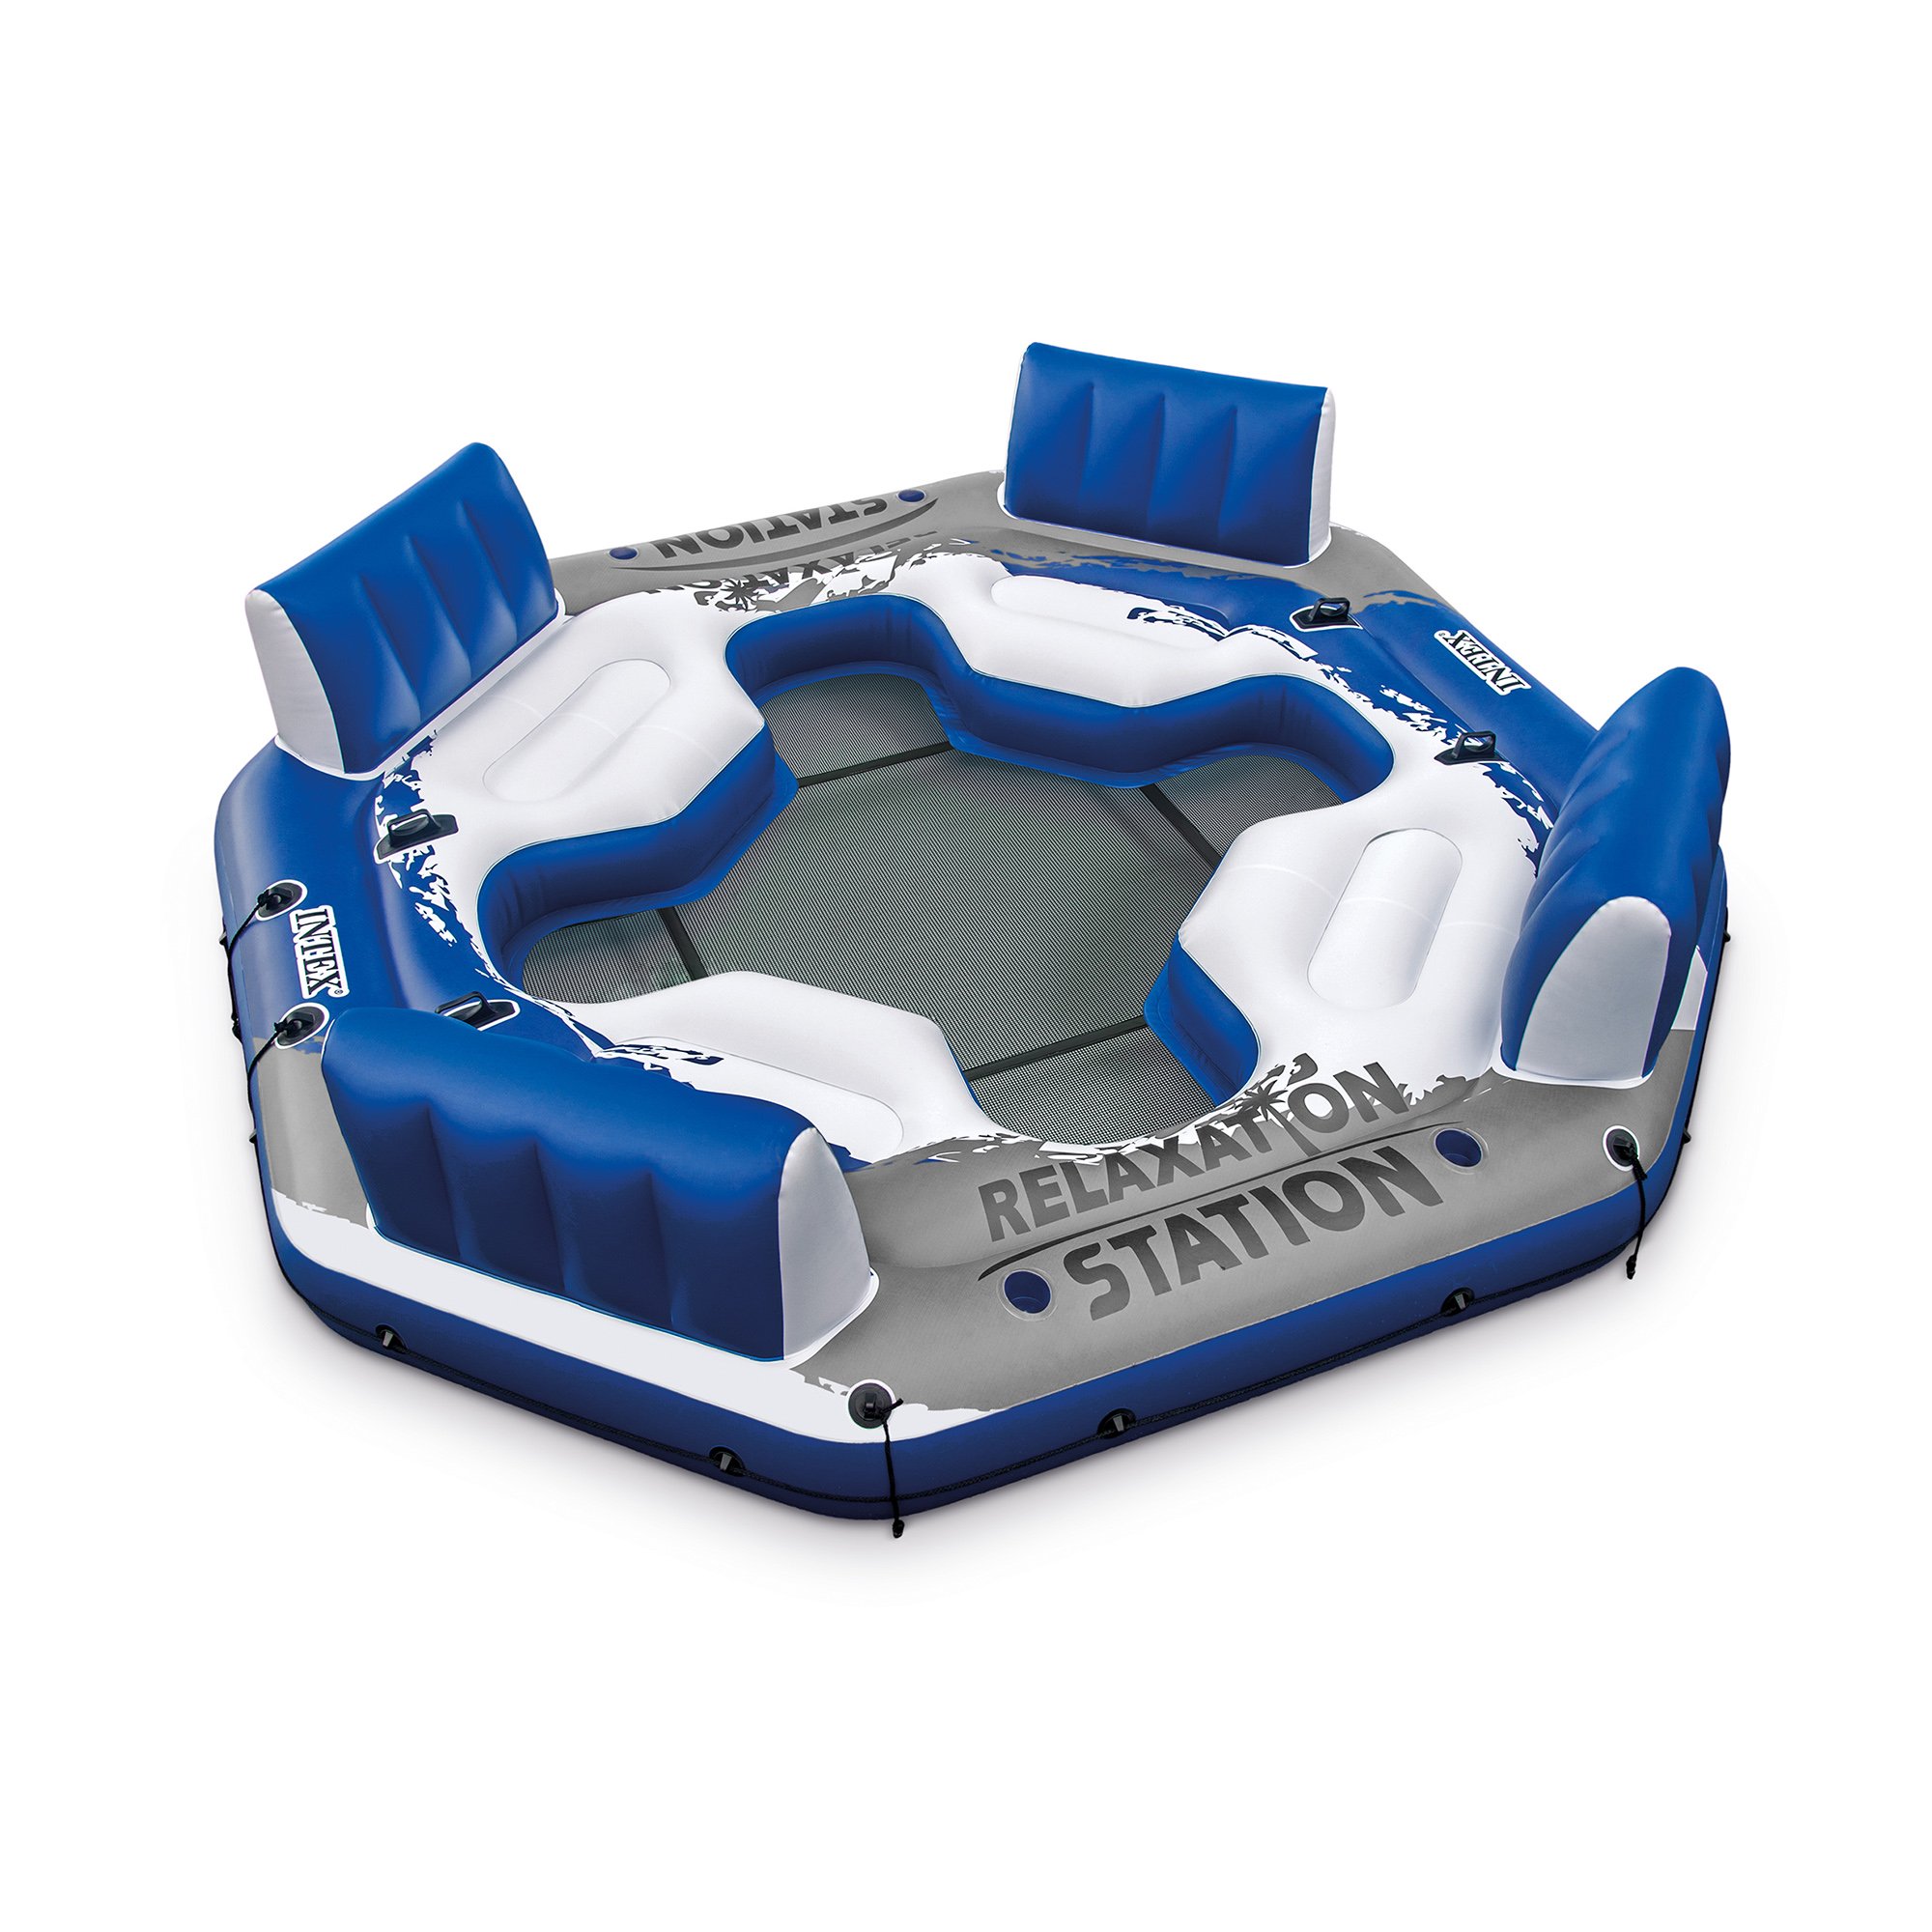 Intex 4-Seat Blue Inflatable Raft at Lowes.com